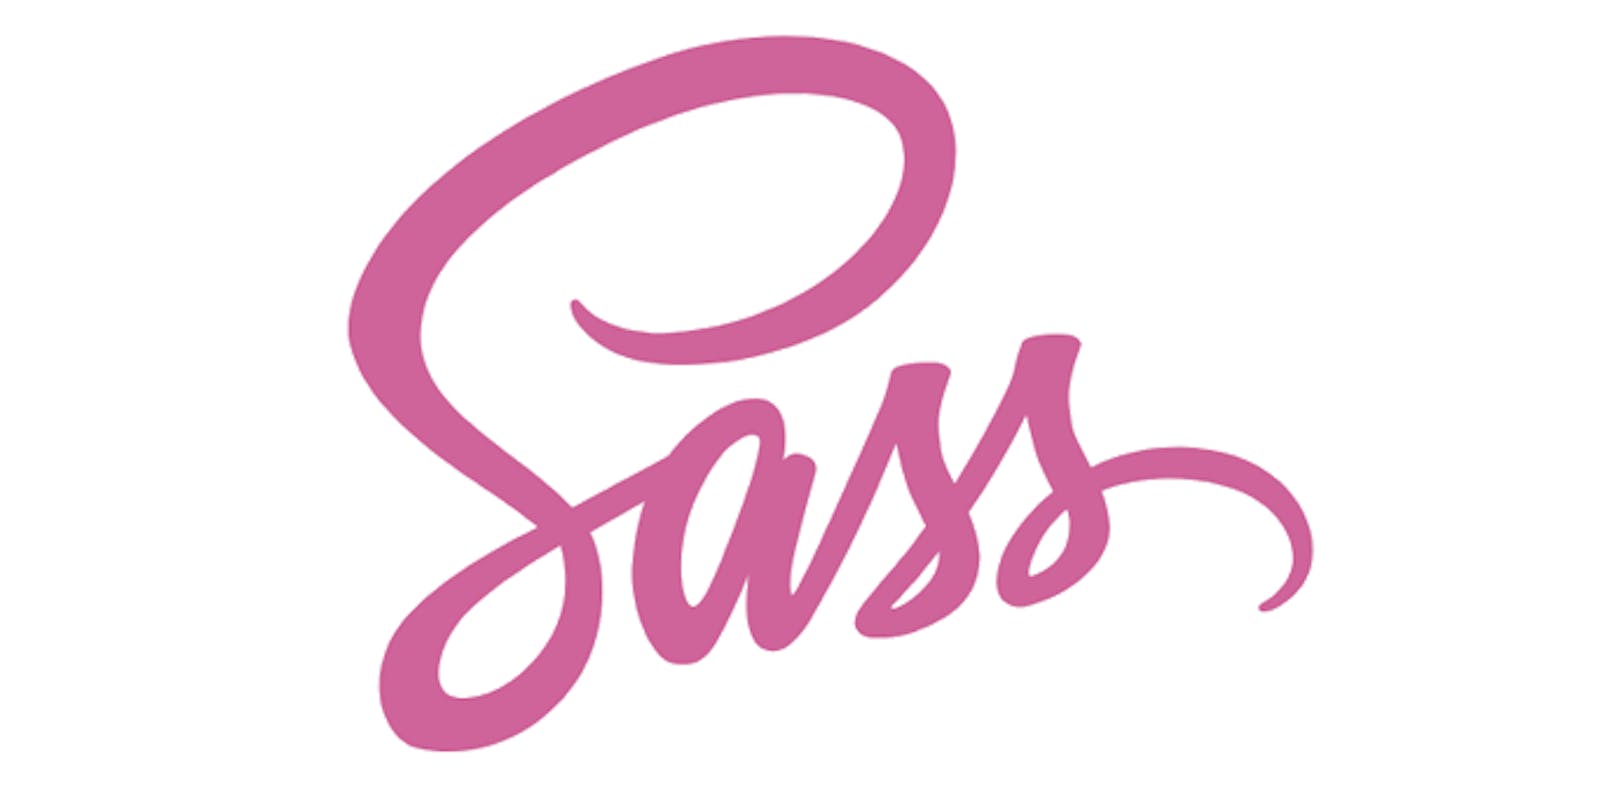 Sass : Syntactically Awesome Stylesheet